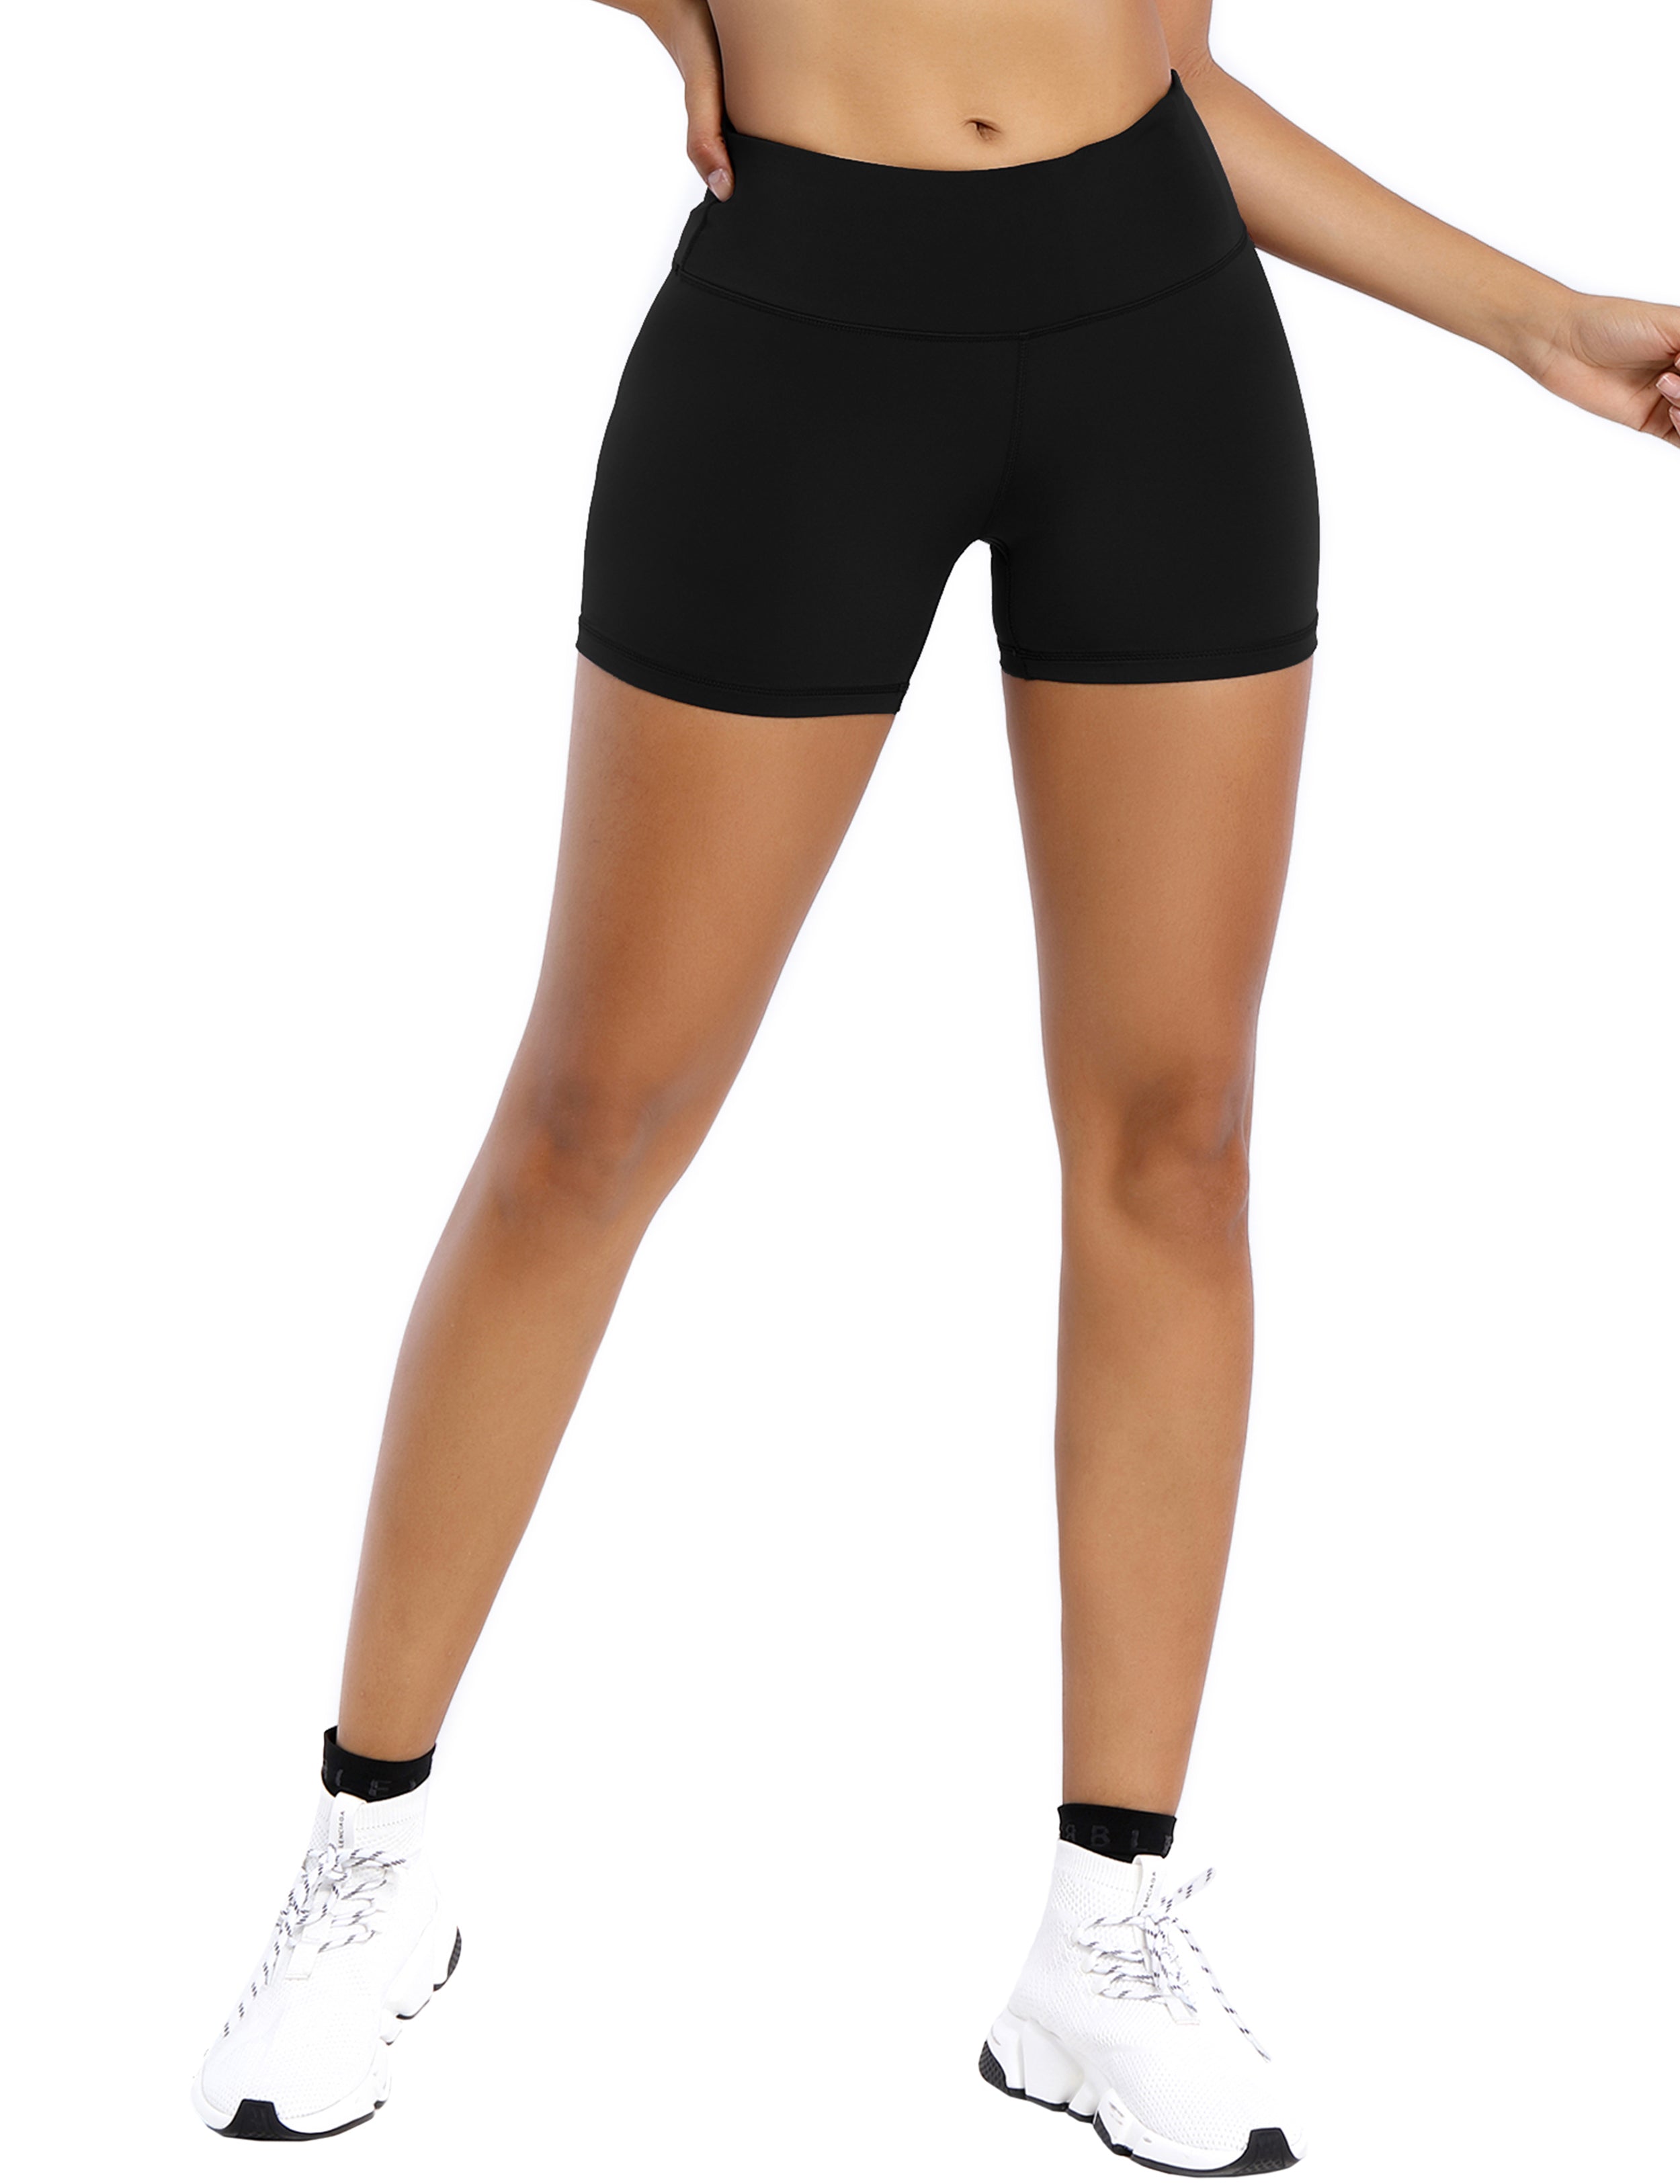 4" Jogging Shorts black Sleek, soft, smooth and totally comfortable: our newest style is here. Softest-ever fabric High elasticity High density 4-way stretch Fabric doesn't attract lint easily No see-through Moisture-wicking Machine wash 75% Nylon, 25% Spandex